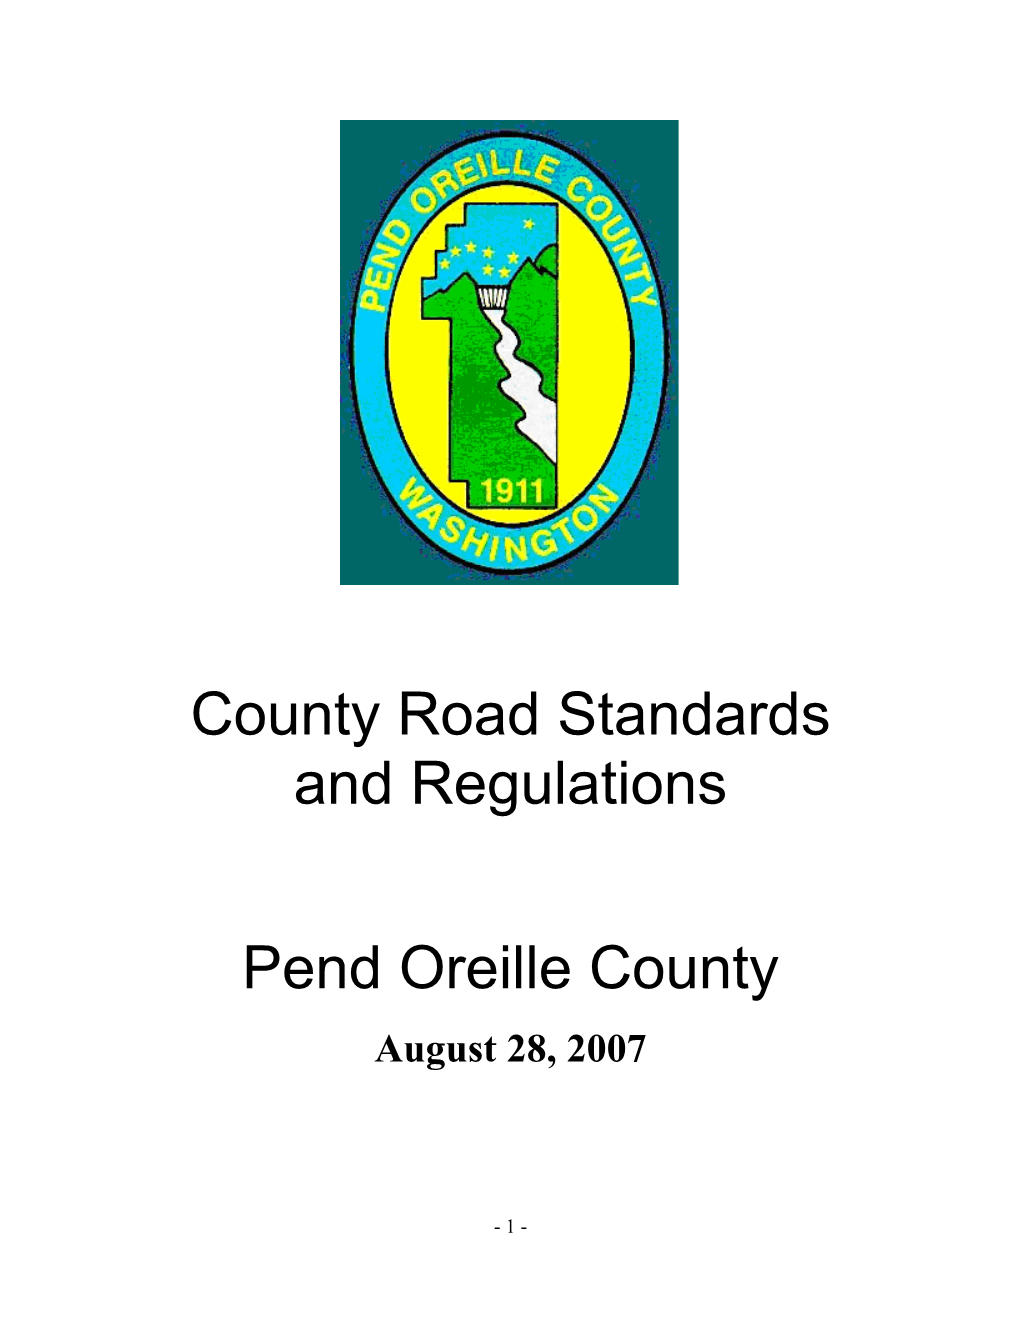 County Road Standards and Regulations Pend Oreille County